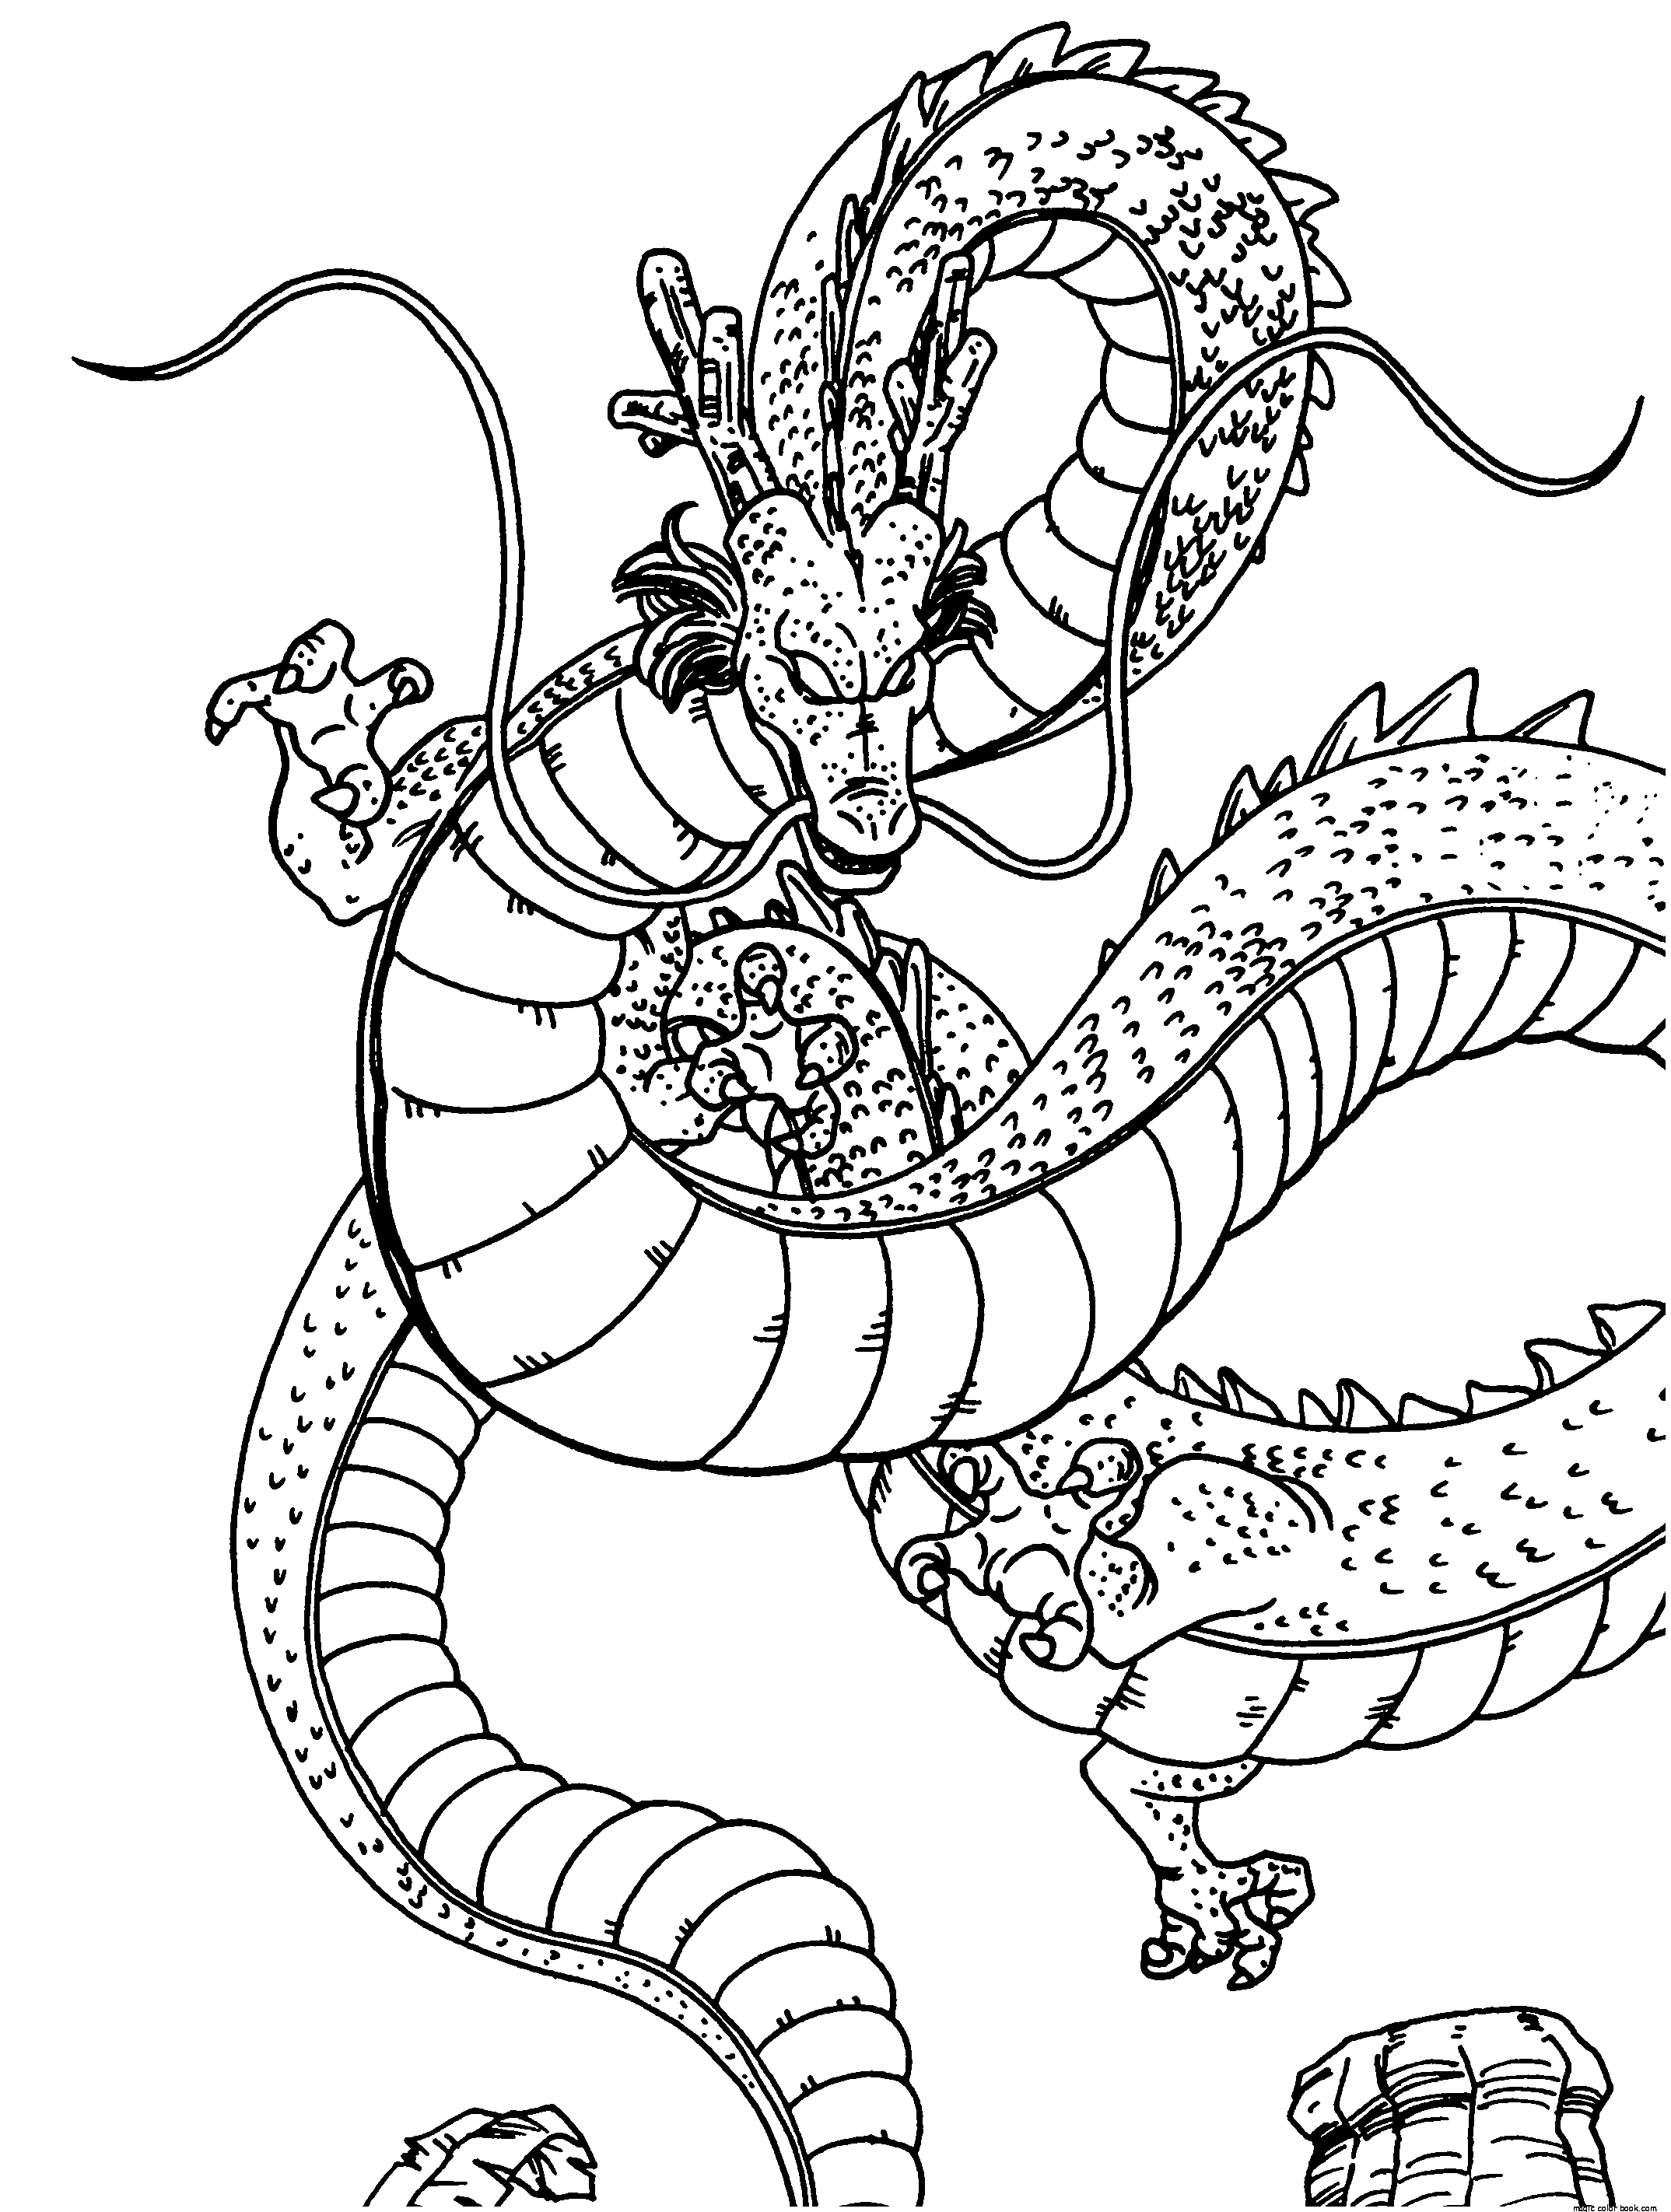 Dragon Ball Z Coloring Pages To Color Online Coloring Home